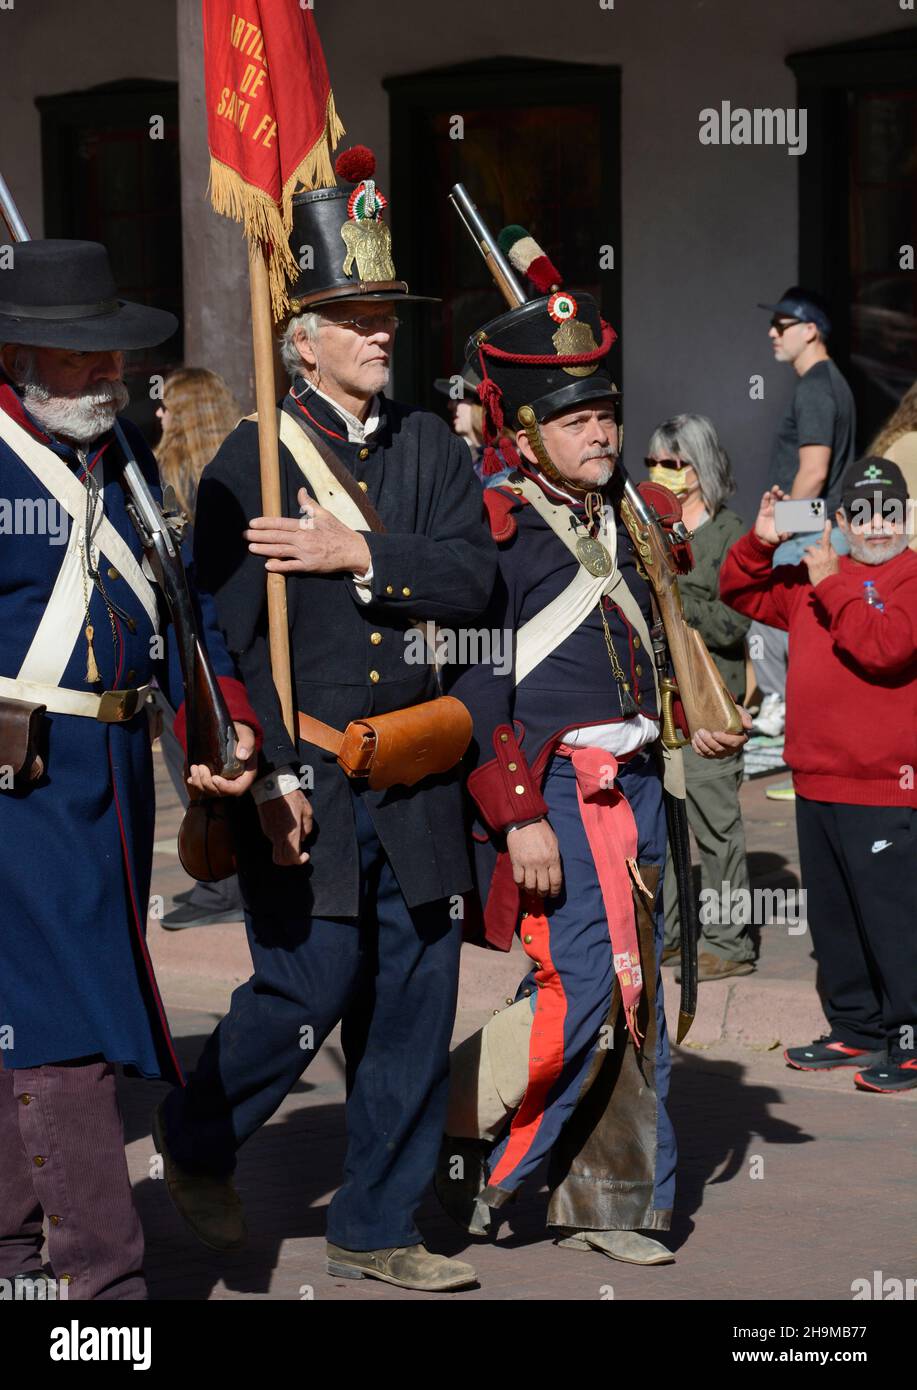 Reenactors in period Mexican infantry uniforms present a dramatic reenactment of the 1821 opening of the Santa Fe Trail in Santa Fe, New Mexico. Stock Photo